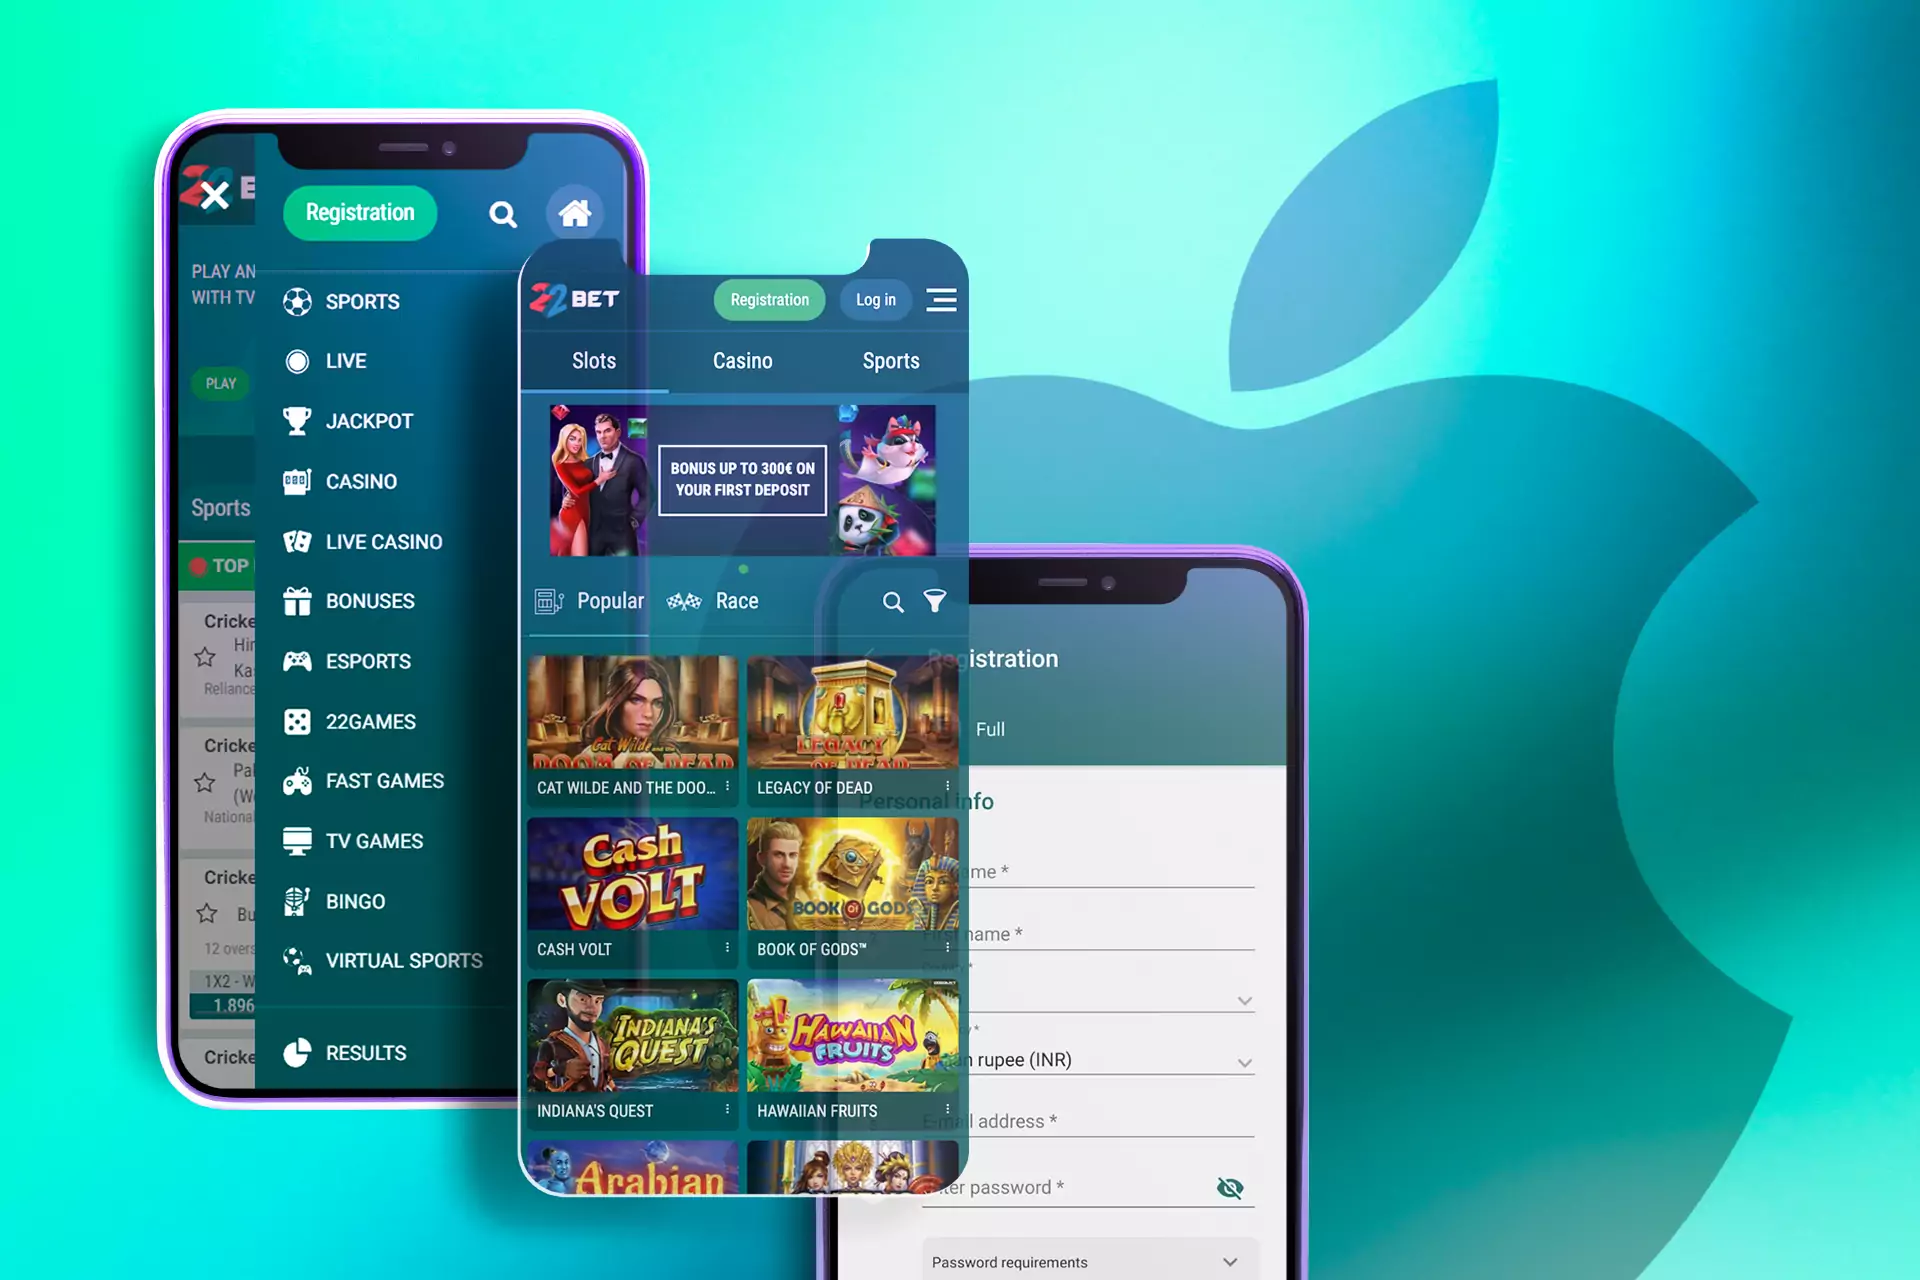 iOS owners can also enjoy the opportunities of playing casino games in the app.